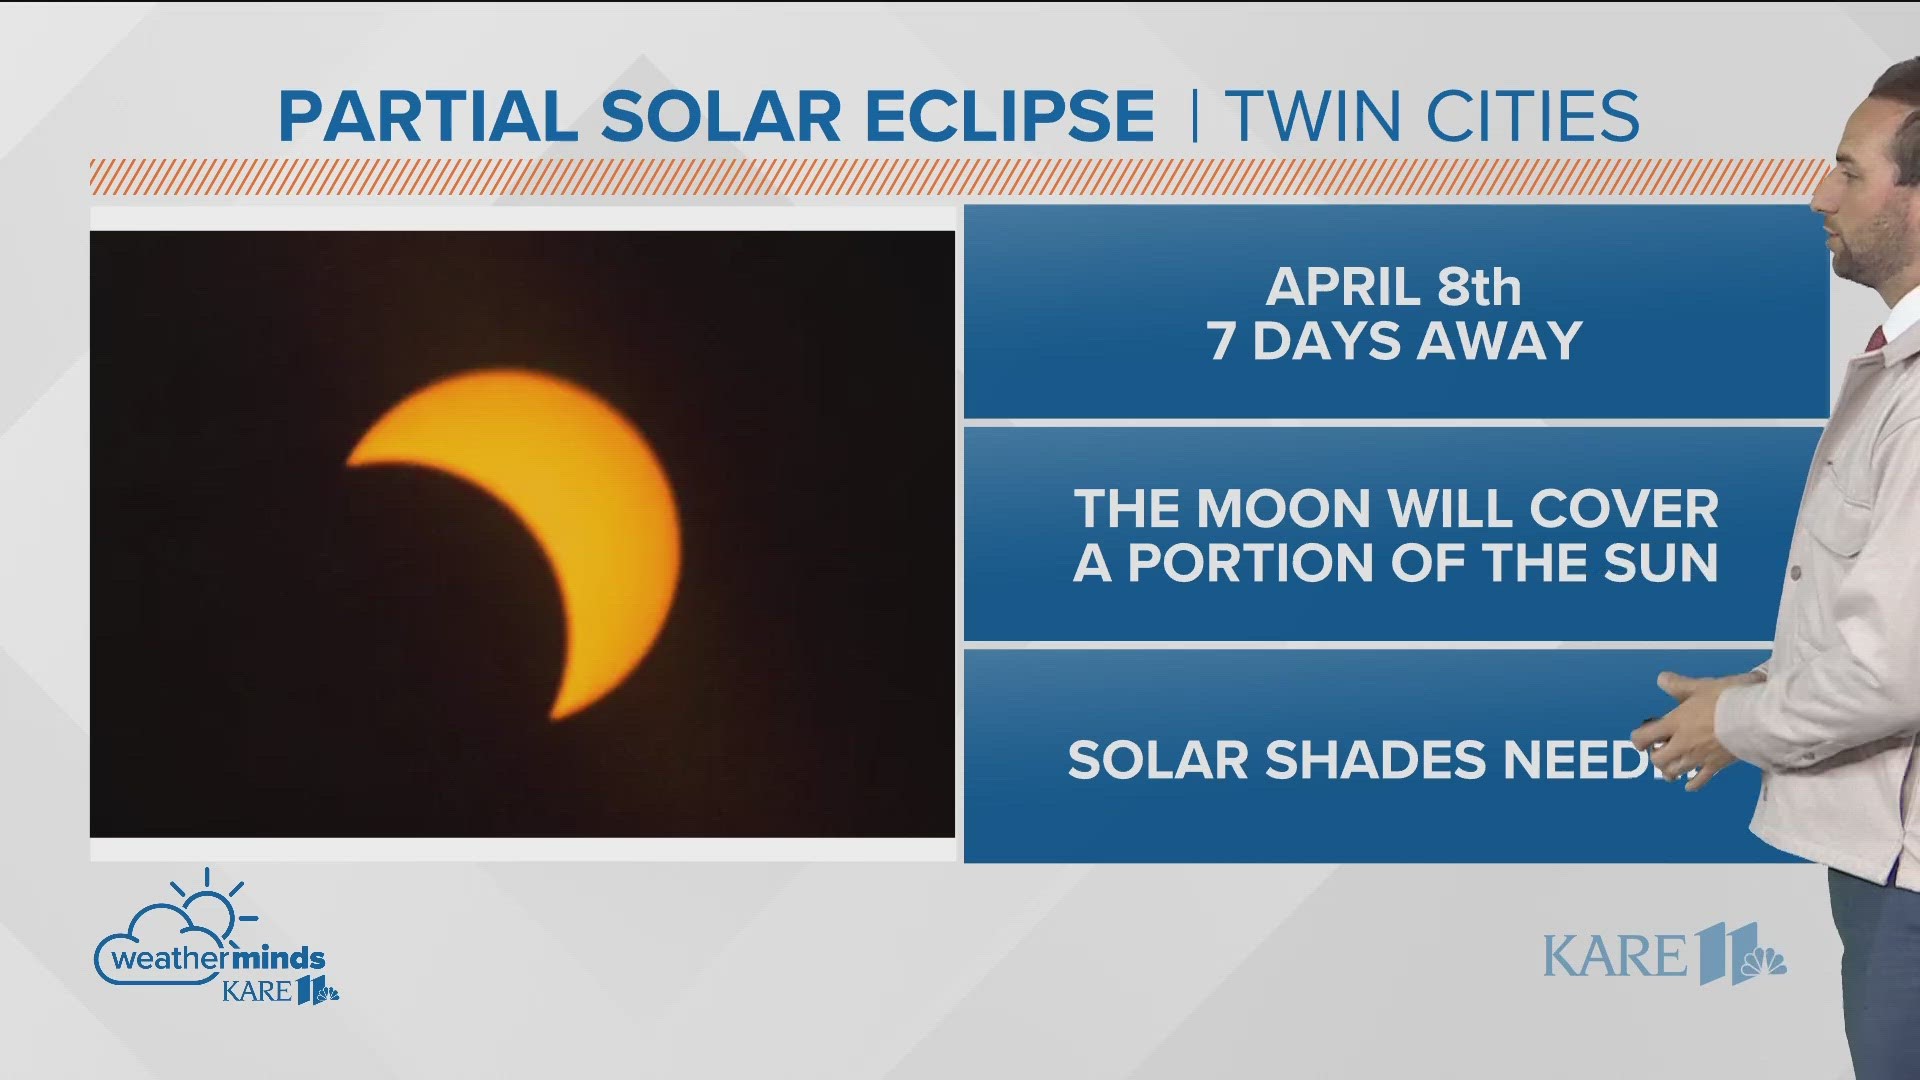 On April 8, Minnesota residents have a chance to see a partial solar eclipse. Grab those solar shades!